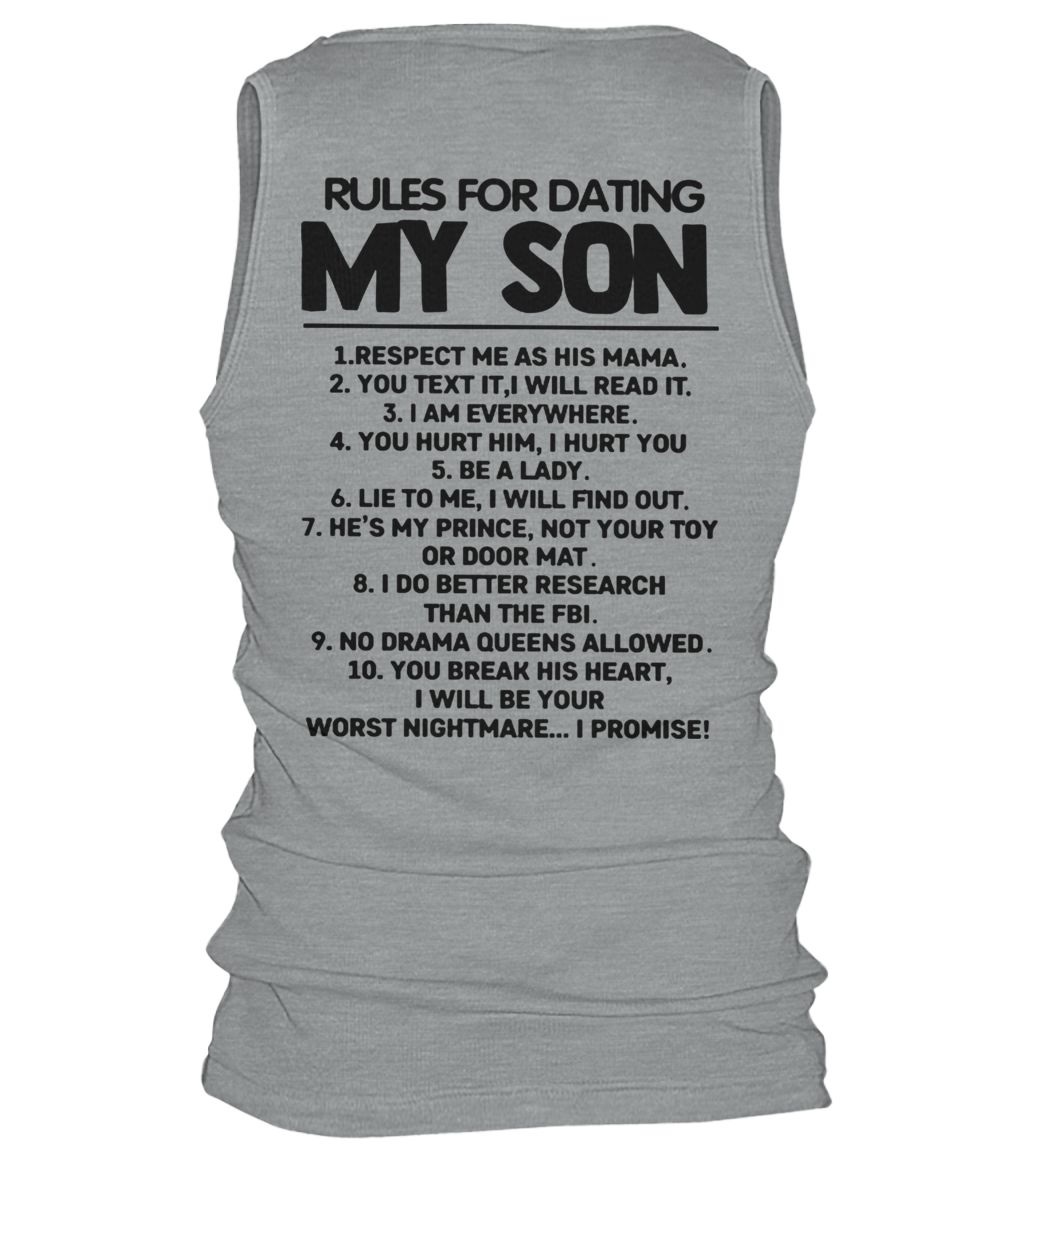 Rules for dating my son 1 respect me as his mama men's tank top